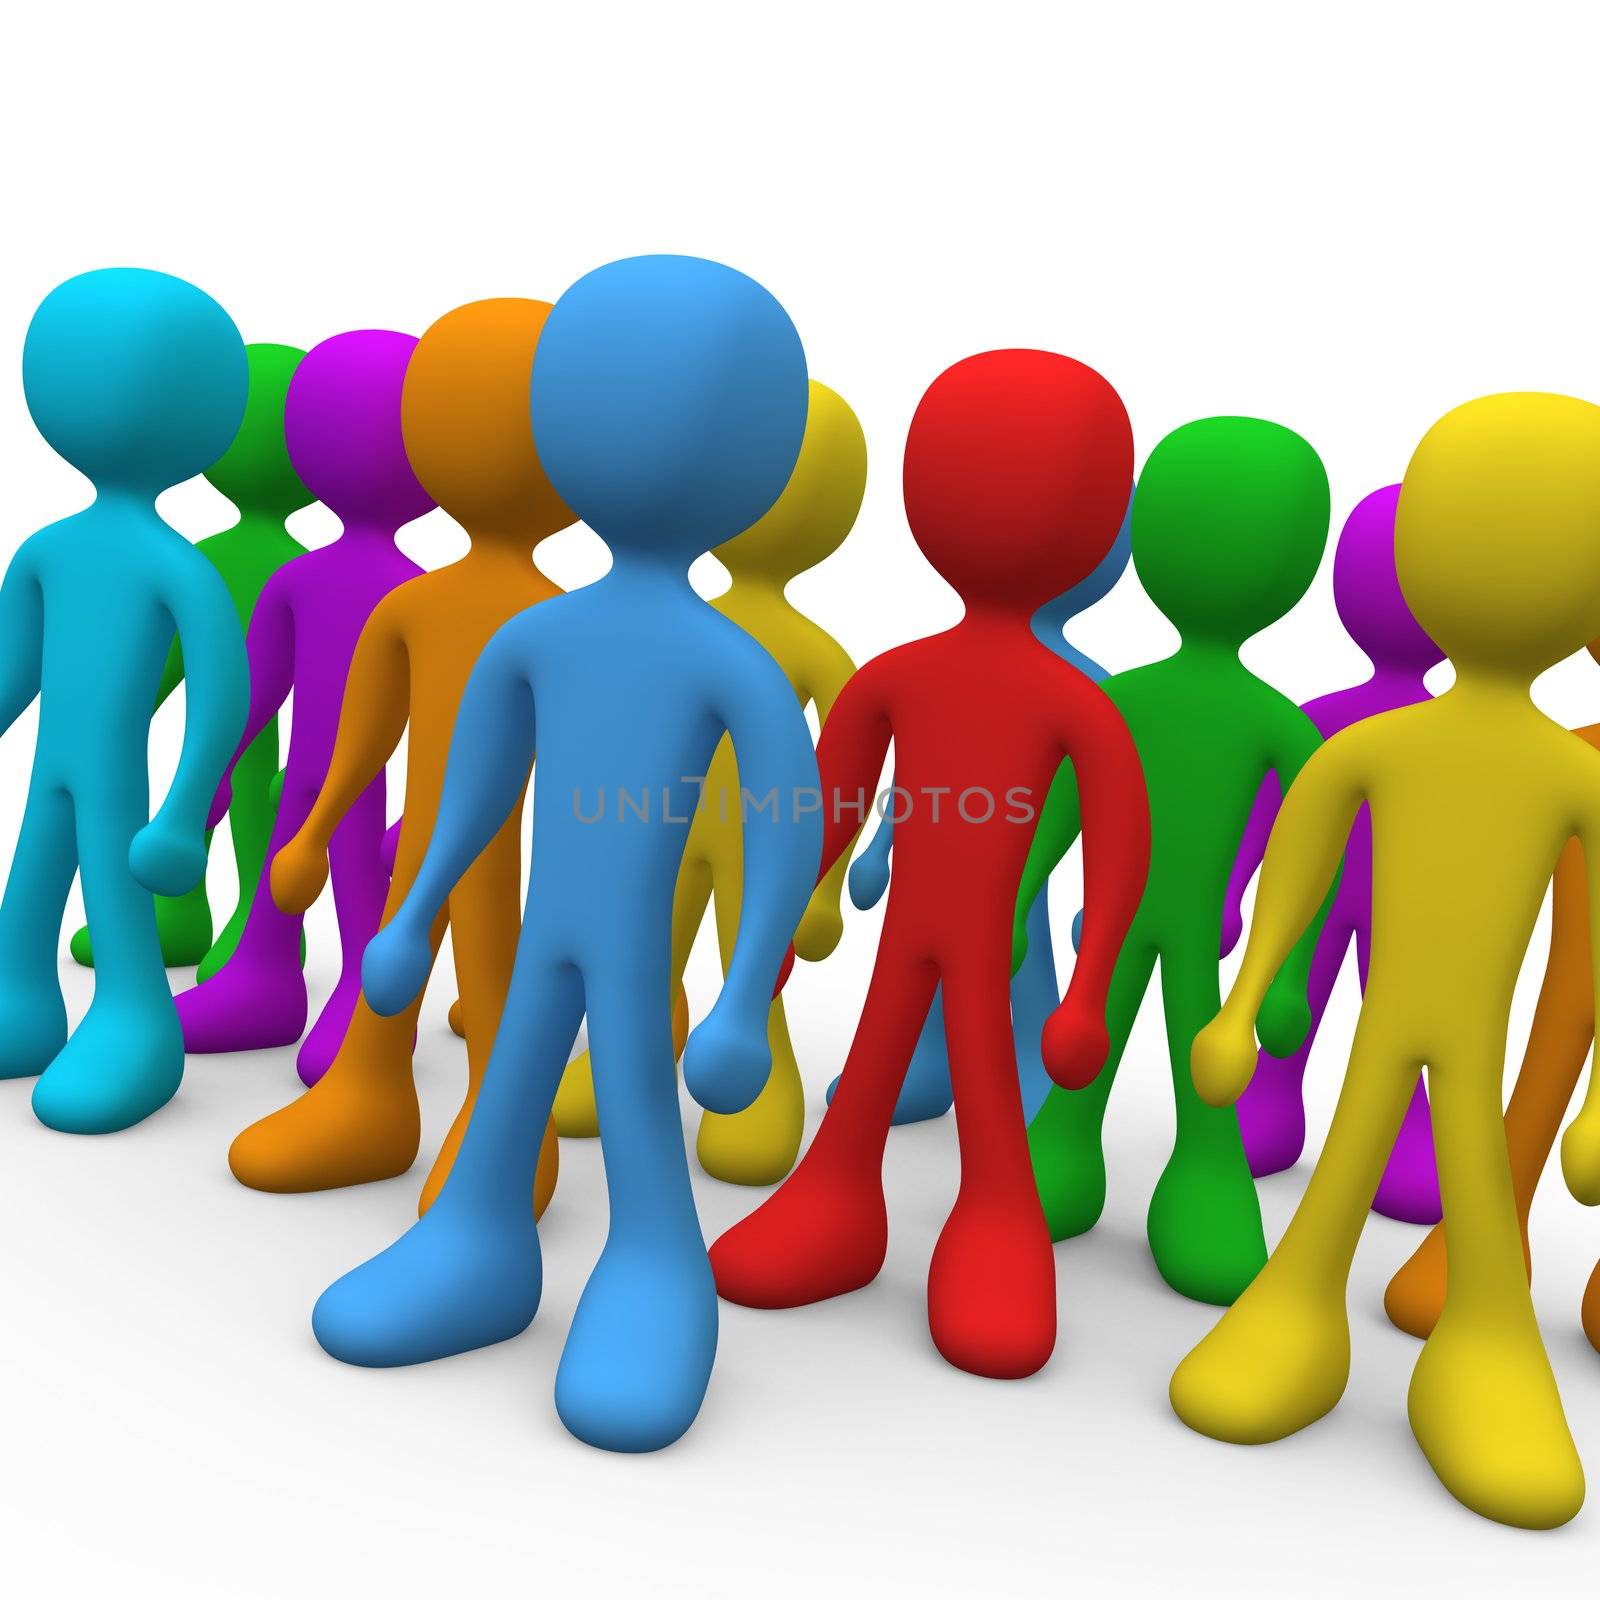 Group of people with various colors.